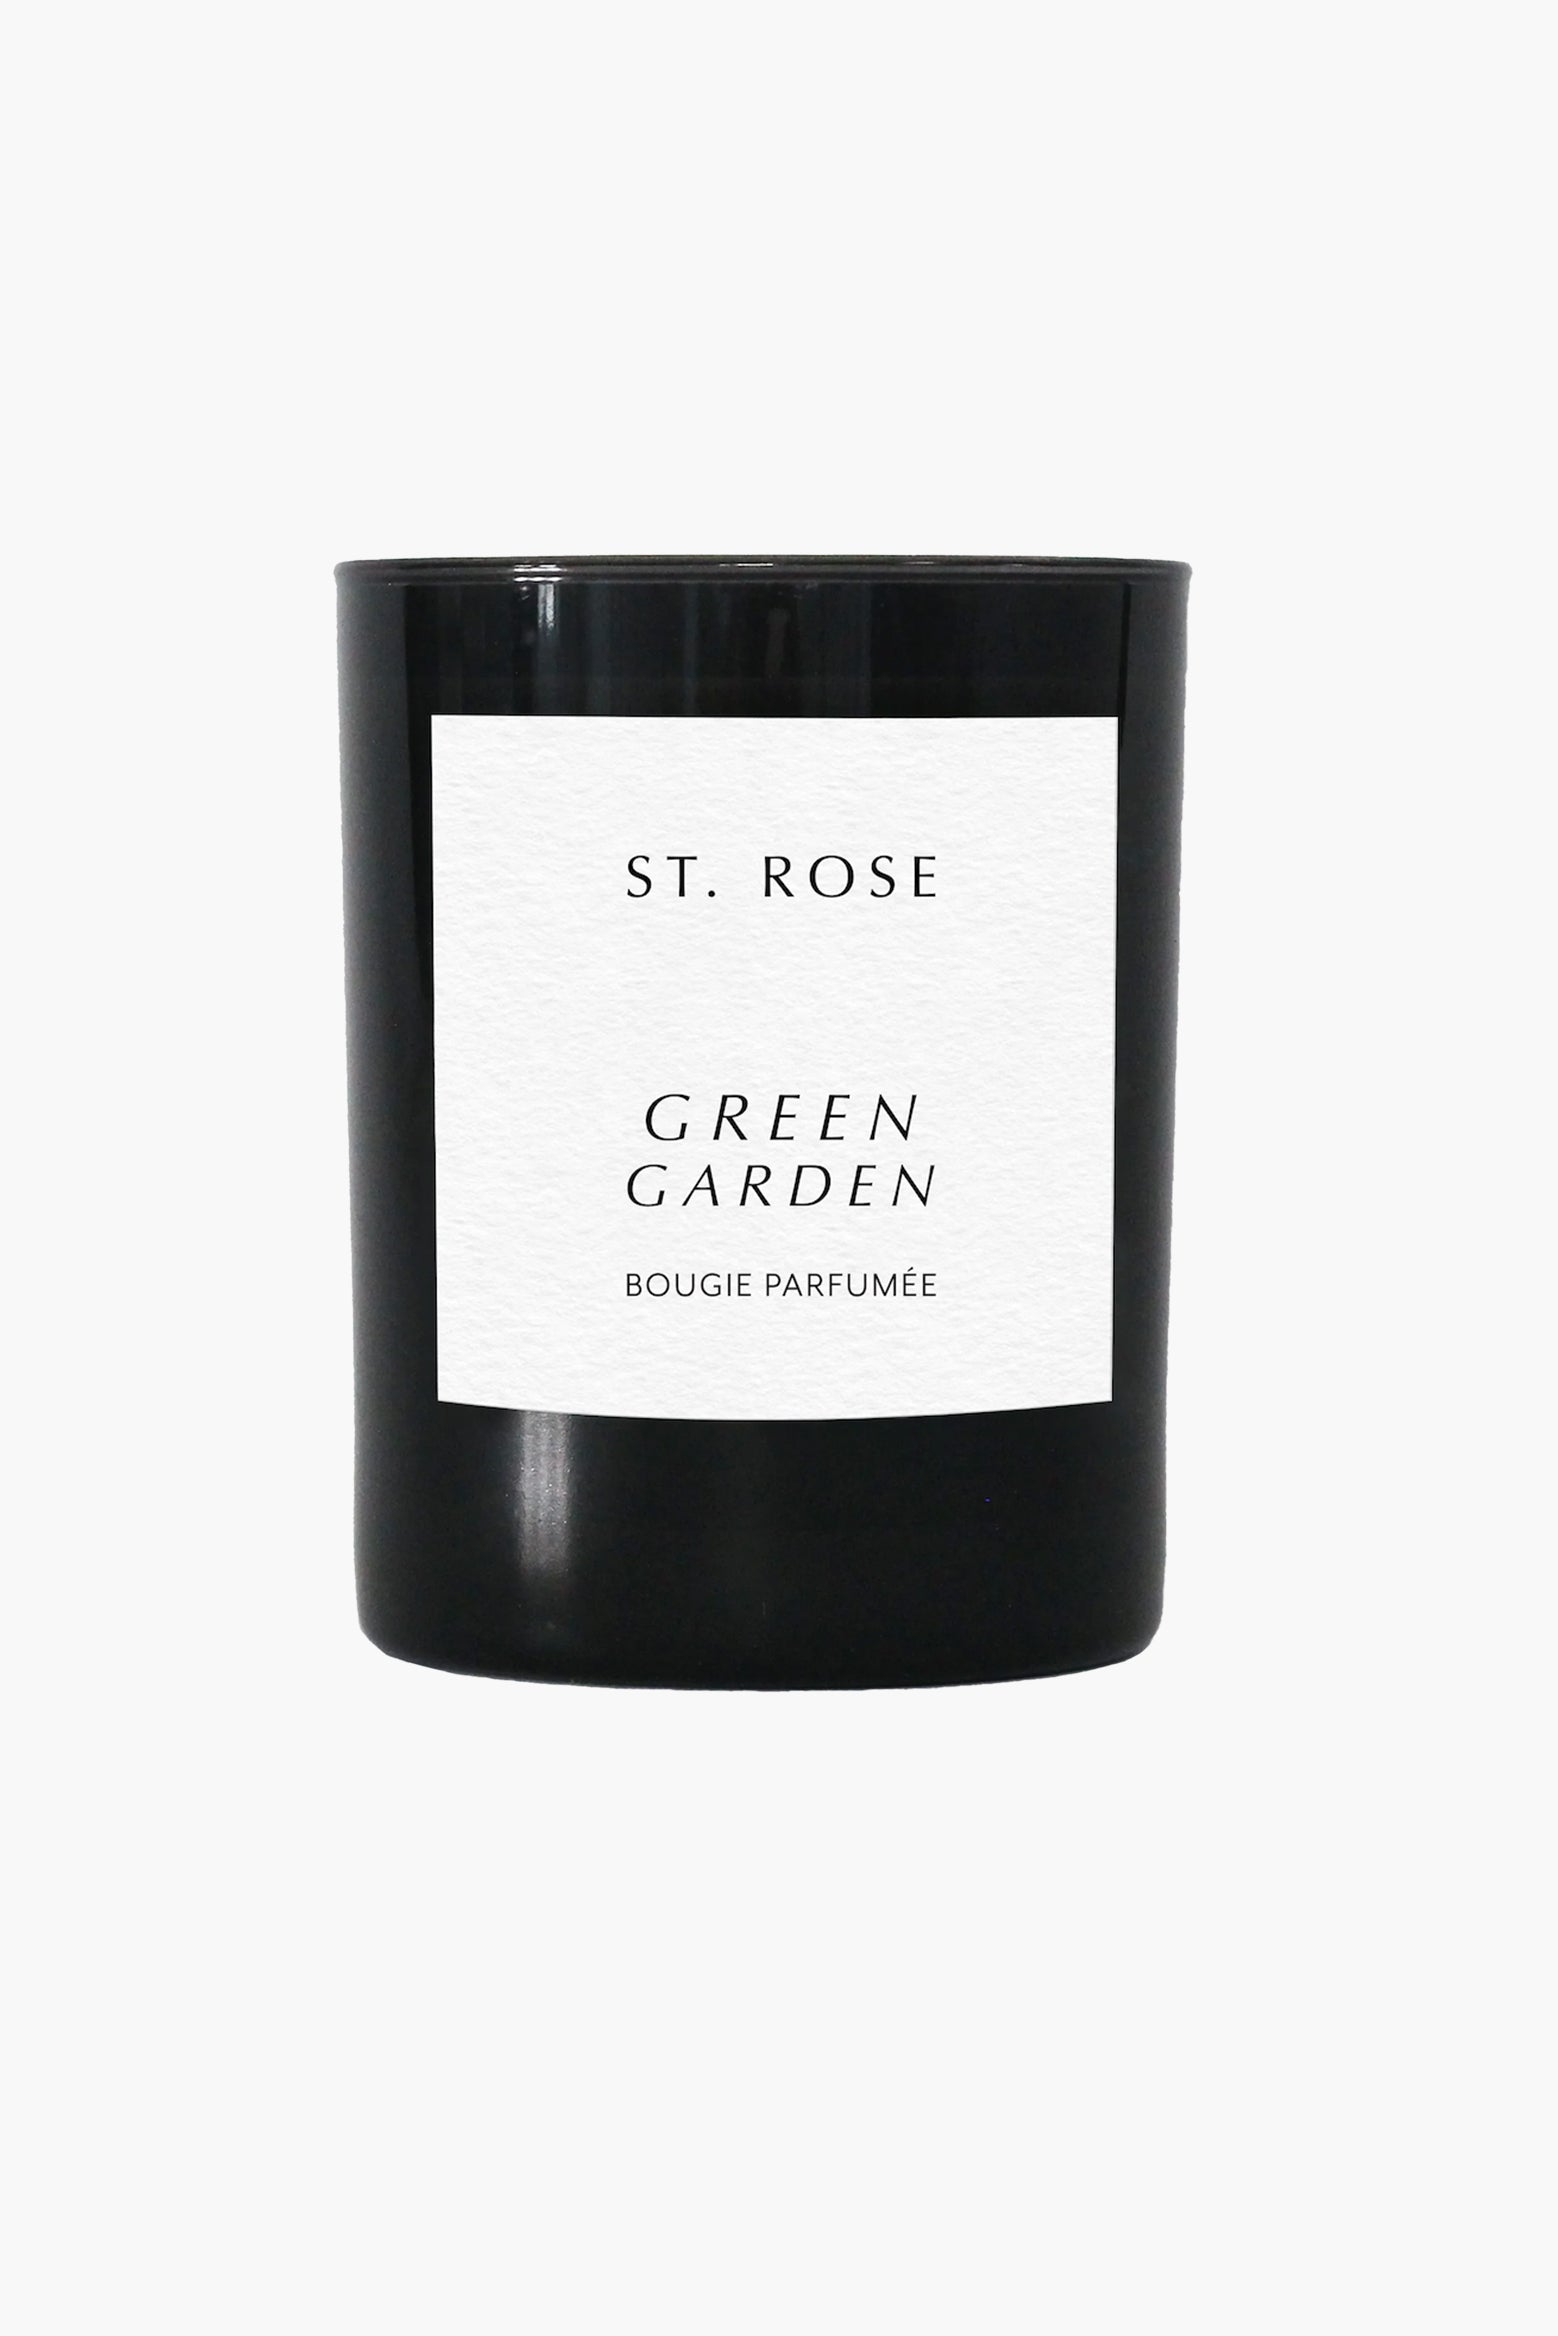 St Rose Green Garden candle available at The New Trend Australia.